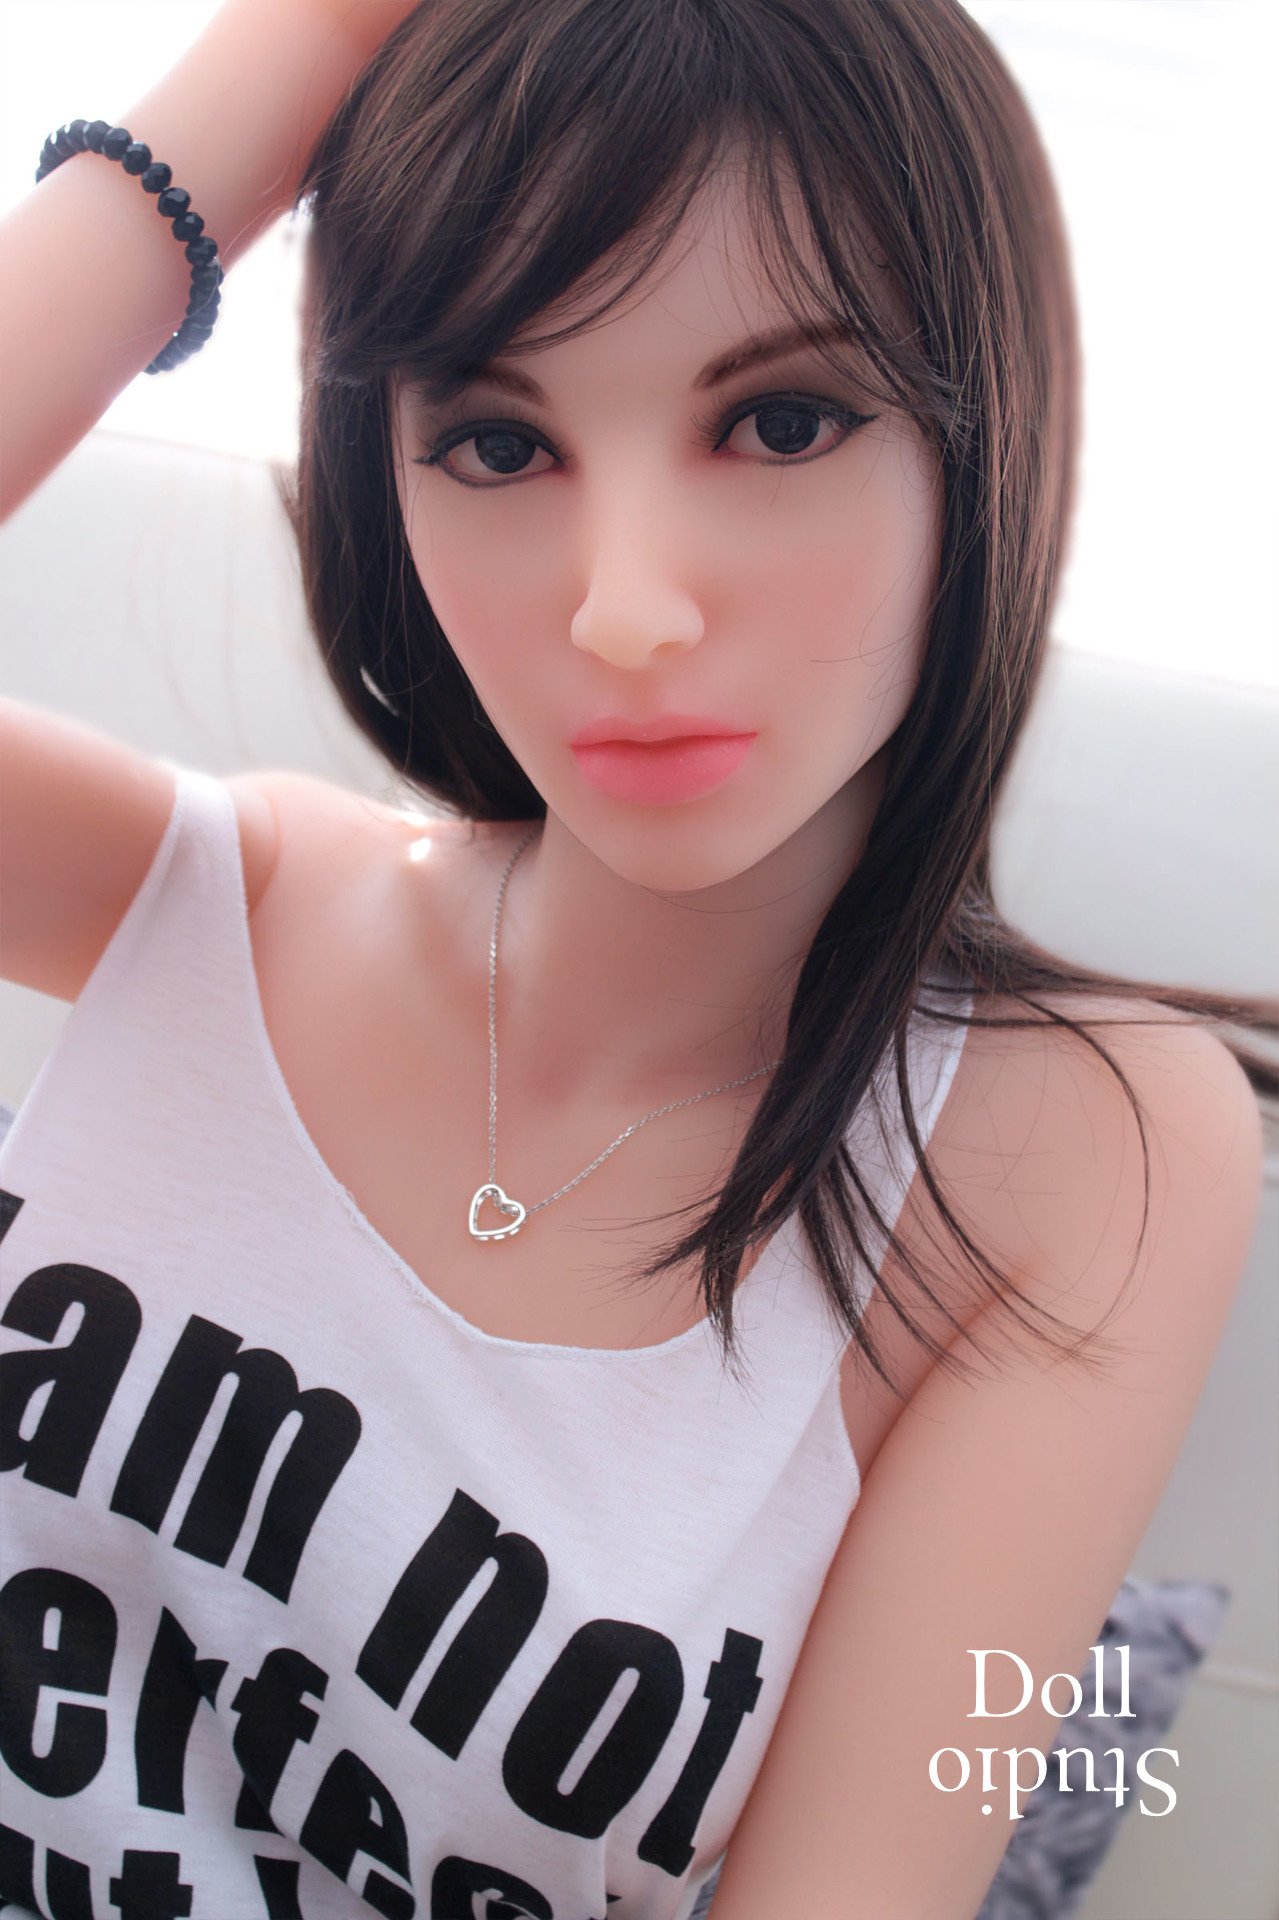 Additional Photos With Doll Forever Fit 155 F Body Style And ›nikki‹ Head D4e No 54 Blog